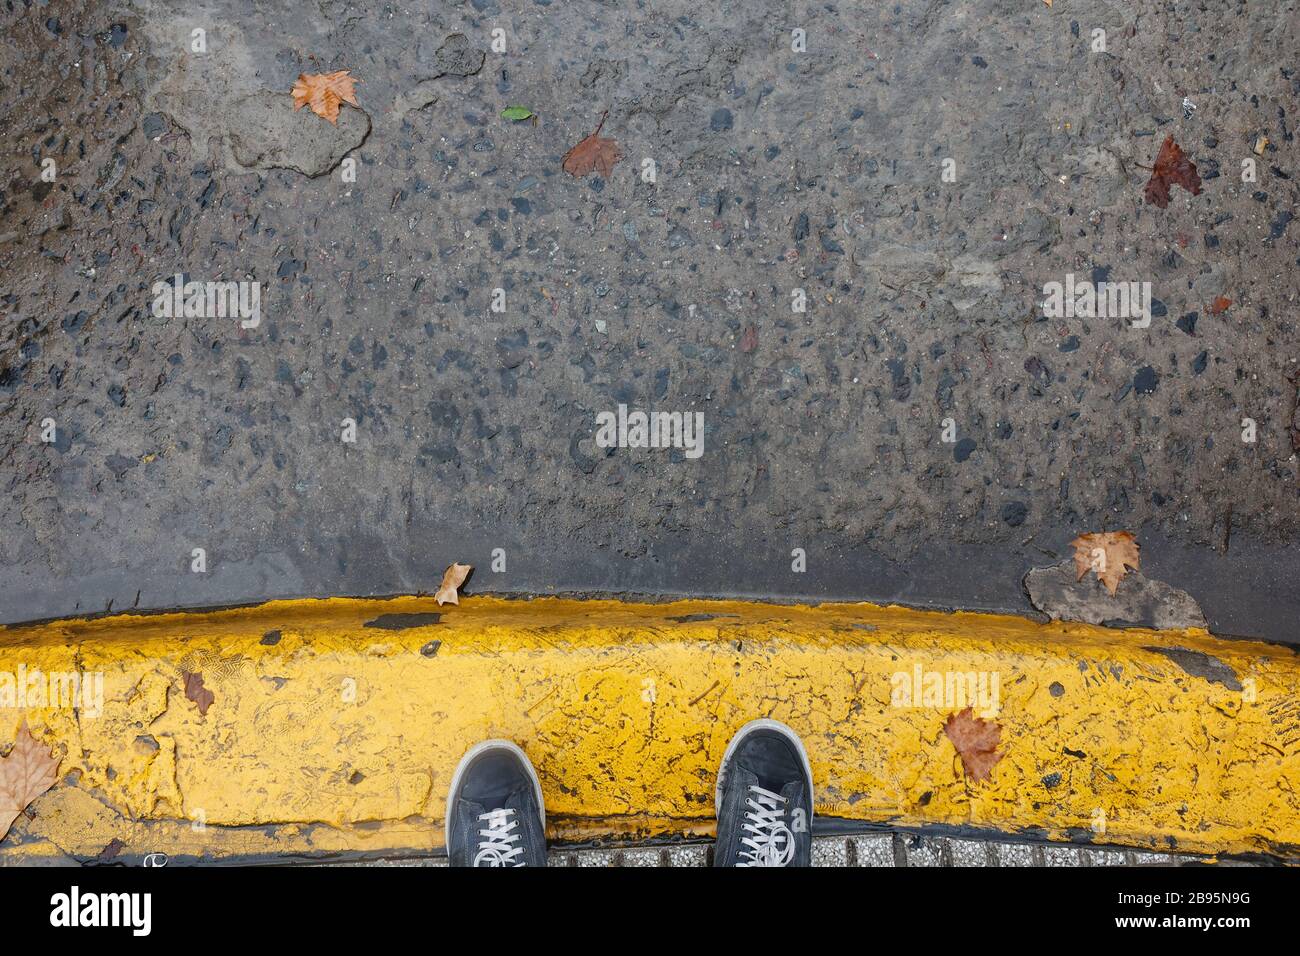 Feet on yellow painted sidewalk curb during a rainig day in Buenos Aires Stock Photo